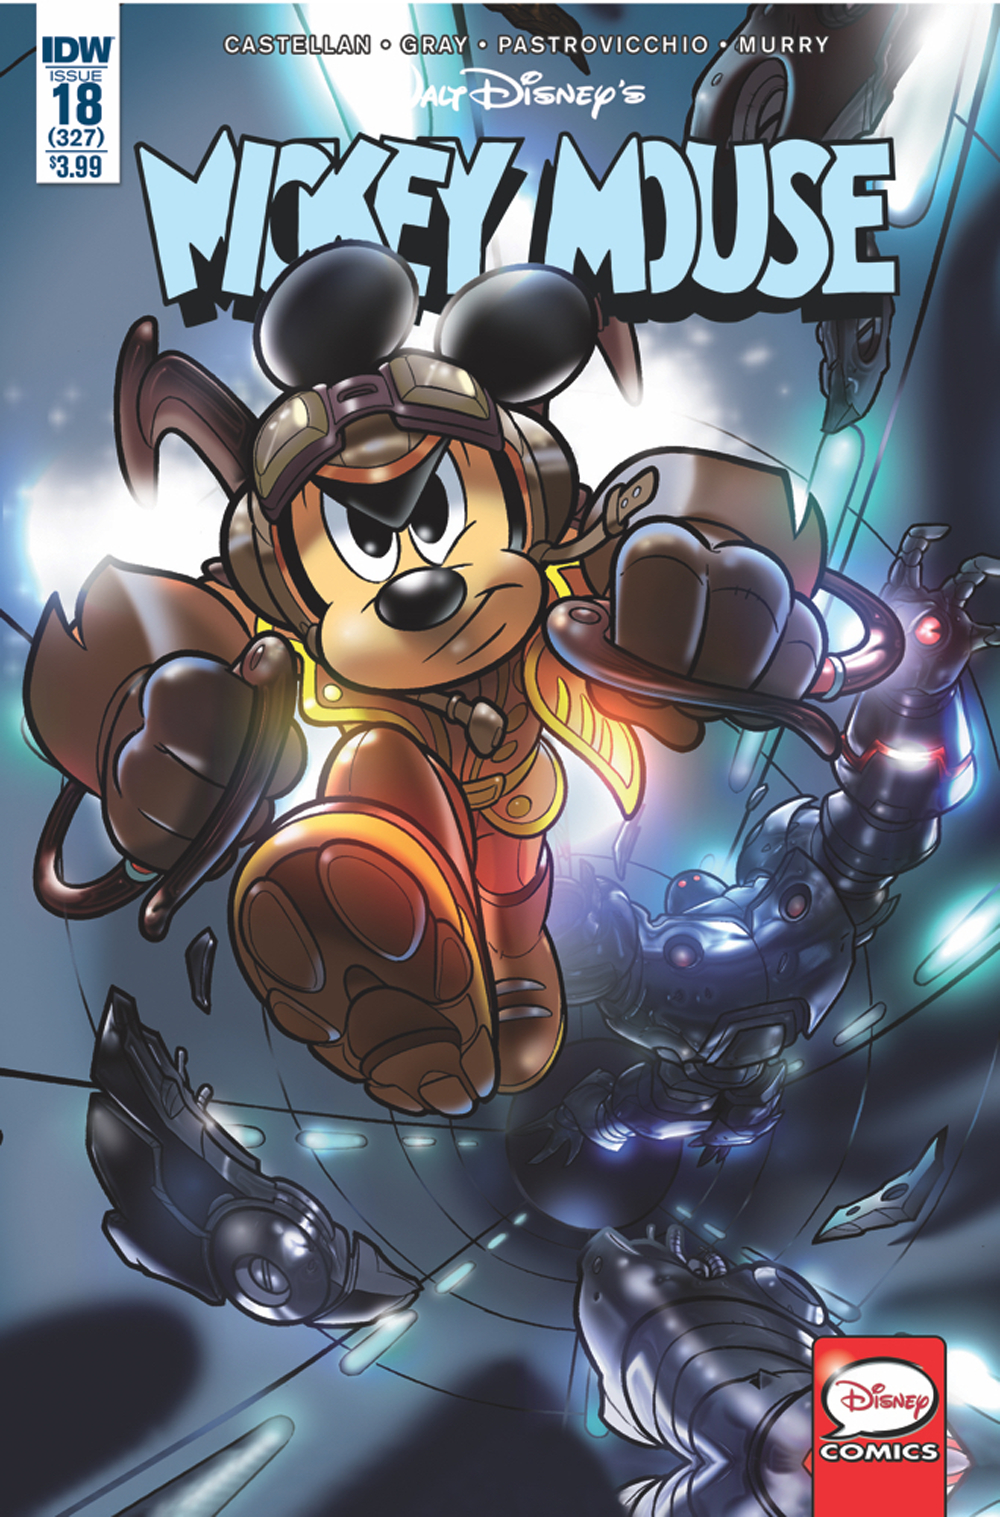 MICKEY MOUSE #18